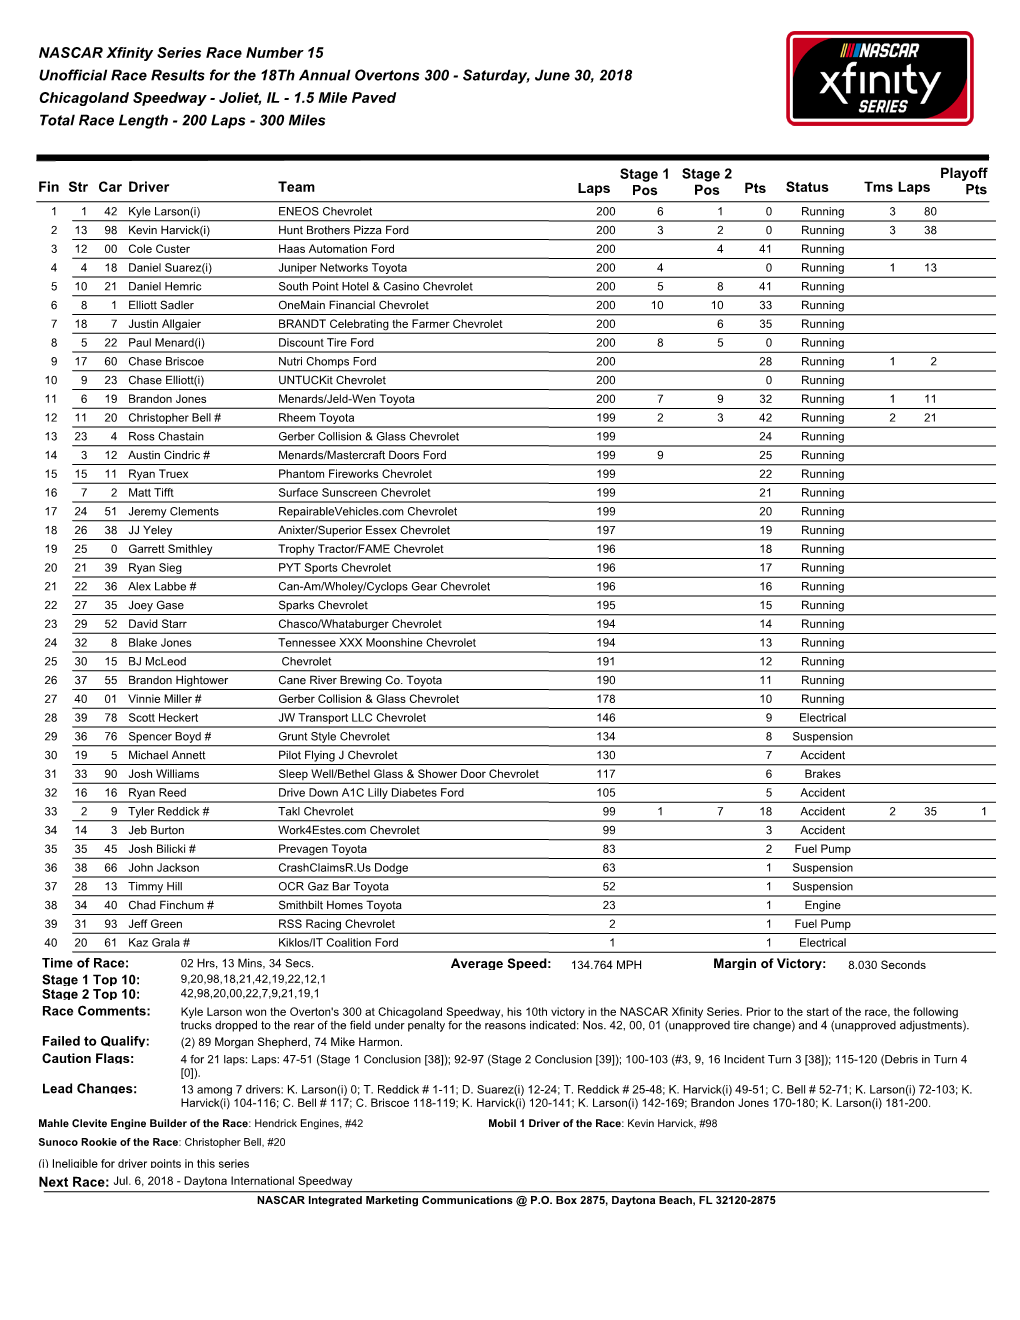 Race Results for the 18Th Annual Overtons 300 - Saturday, June 30, 2018 Chicagoland Speedway - Joliet, IL - 1.5 Mile Paved Total Race Length - 200 Laps - 300 Miles